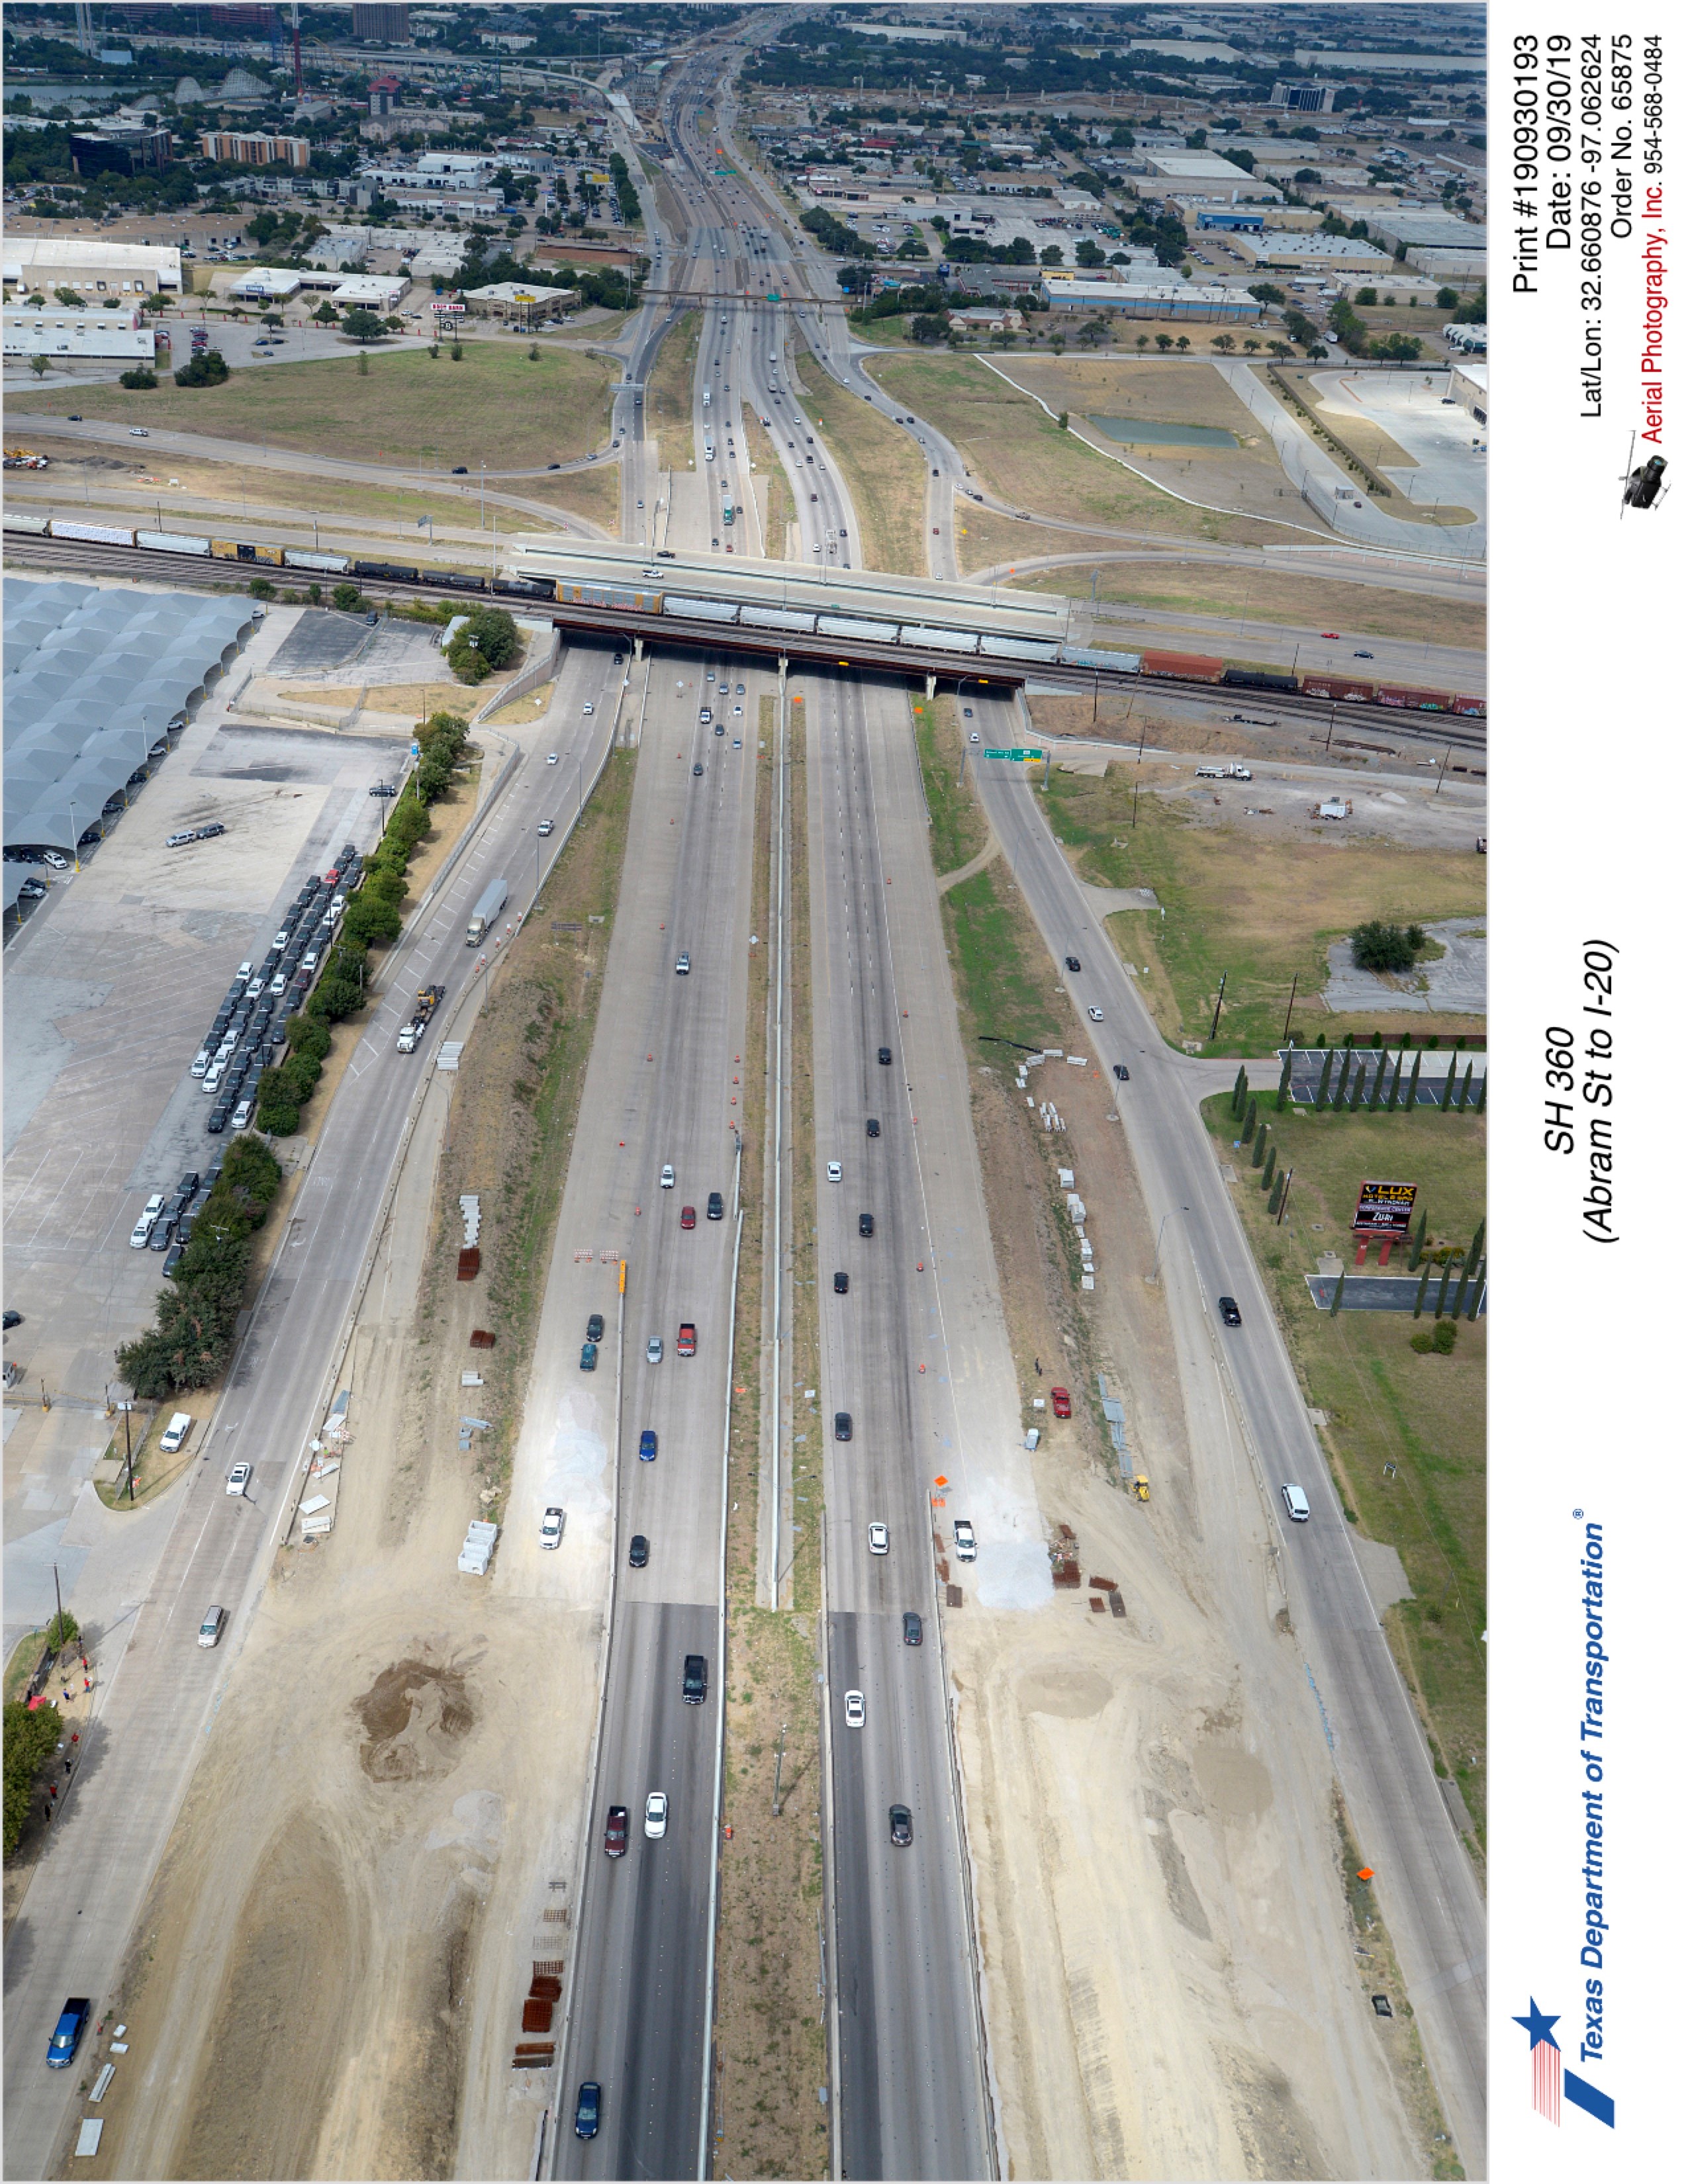 SH 360 looking north at the Division St interchange. Construction of new access ramps is shown in foreground.